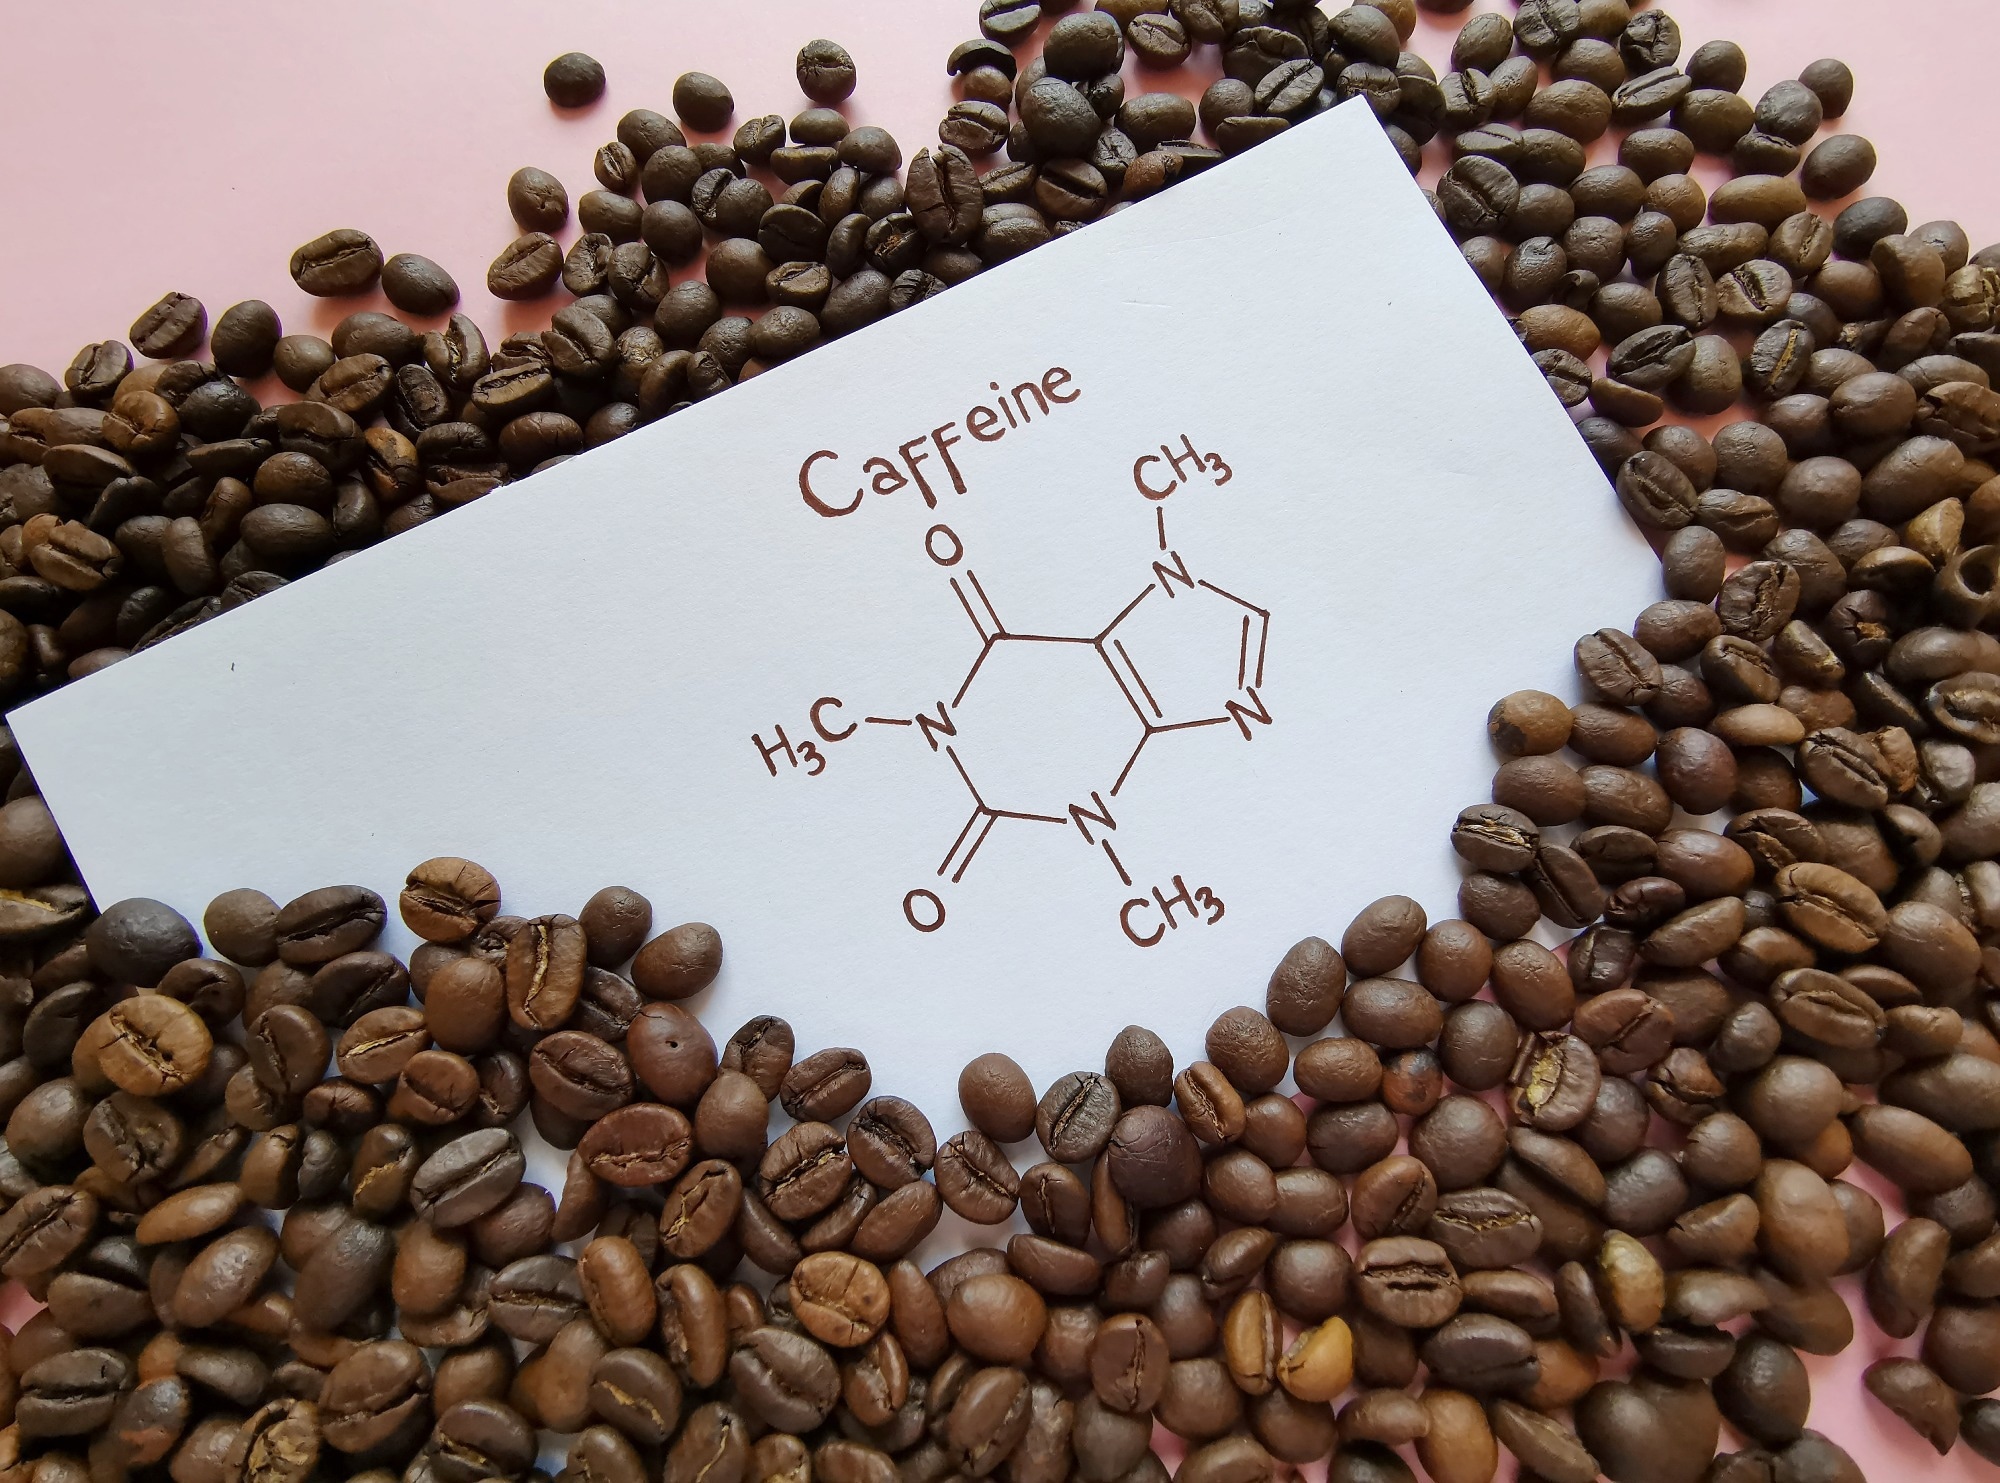 Study: Caffeine intake linked to Asian genetic variants in Parkinson's